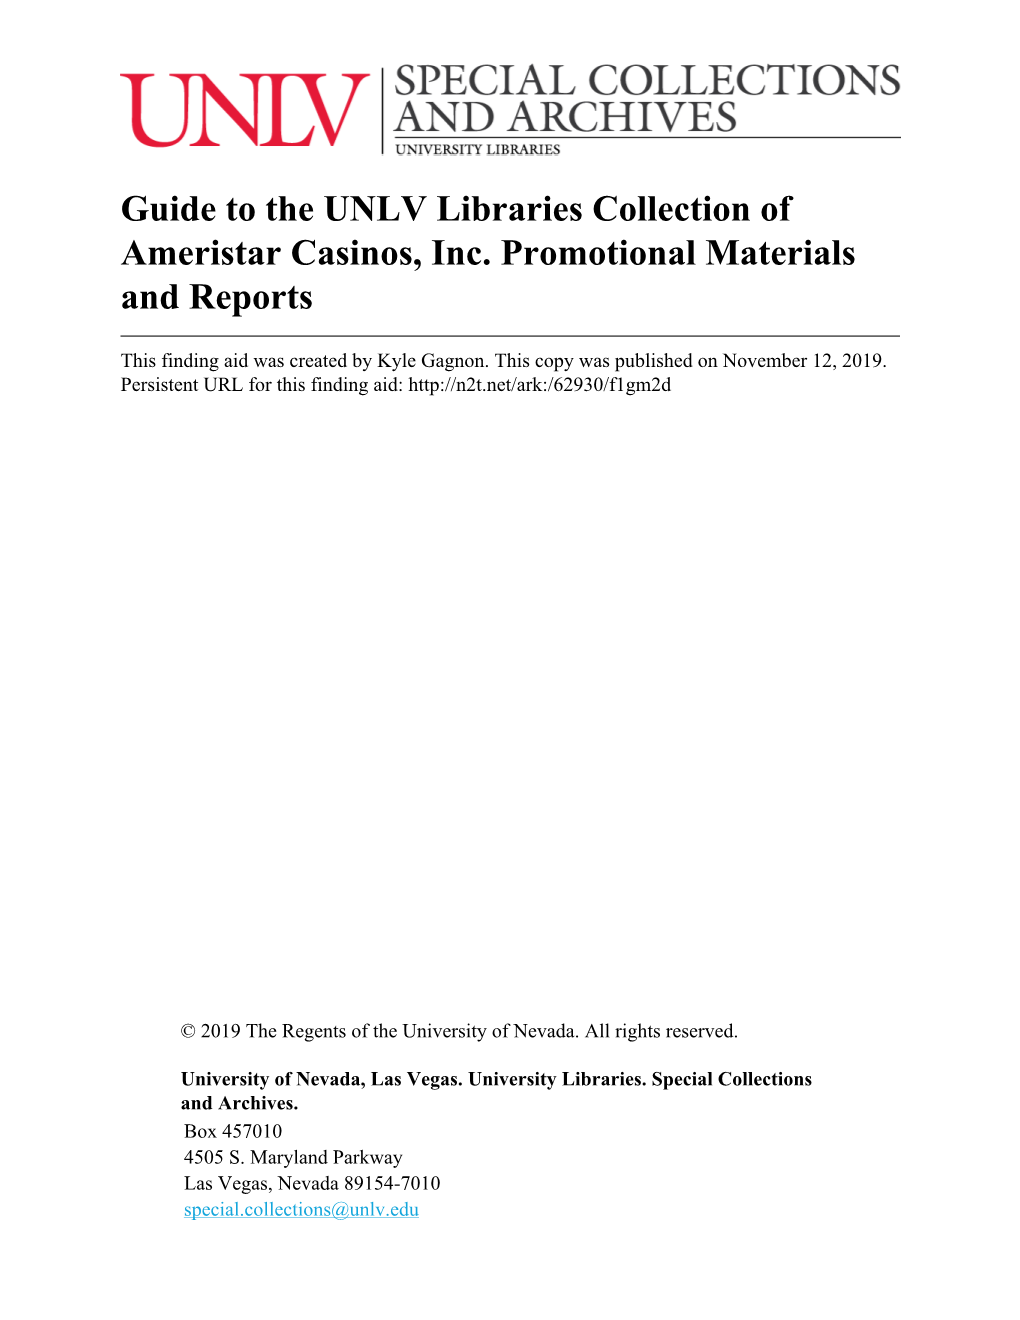 Guide to the UNLV Libraries Collection of Ameristar Casinos, Inc